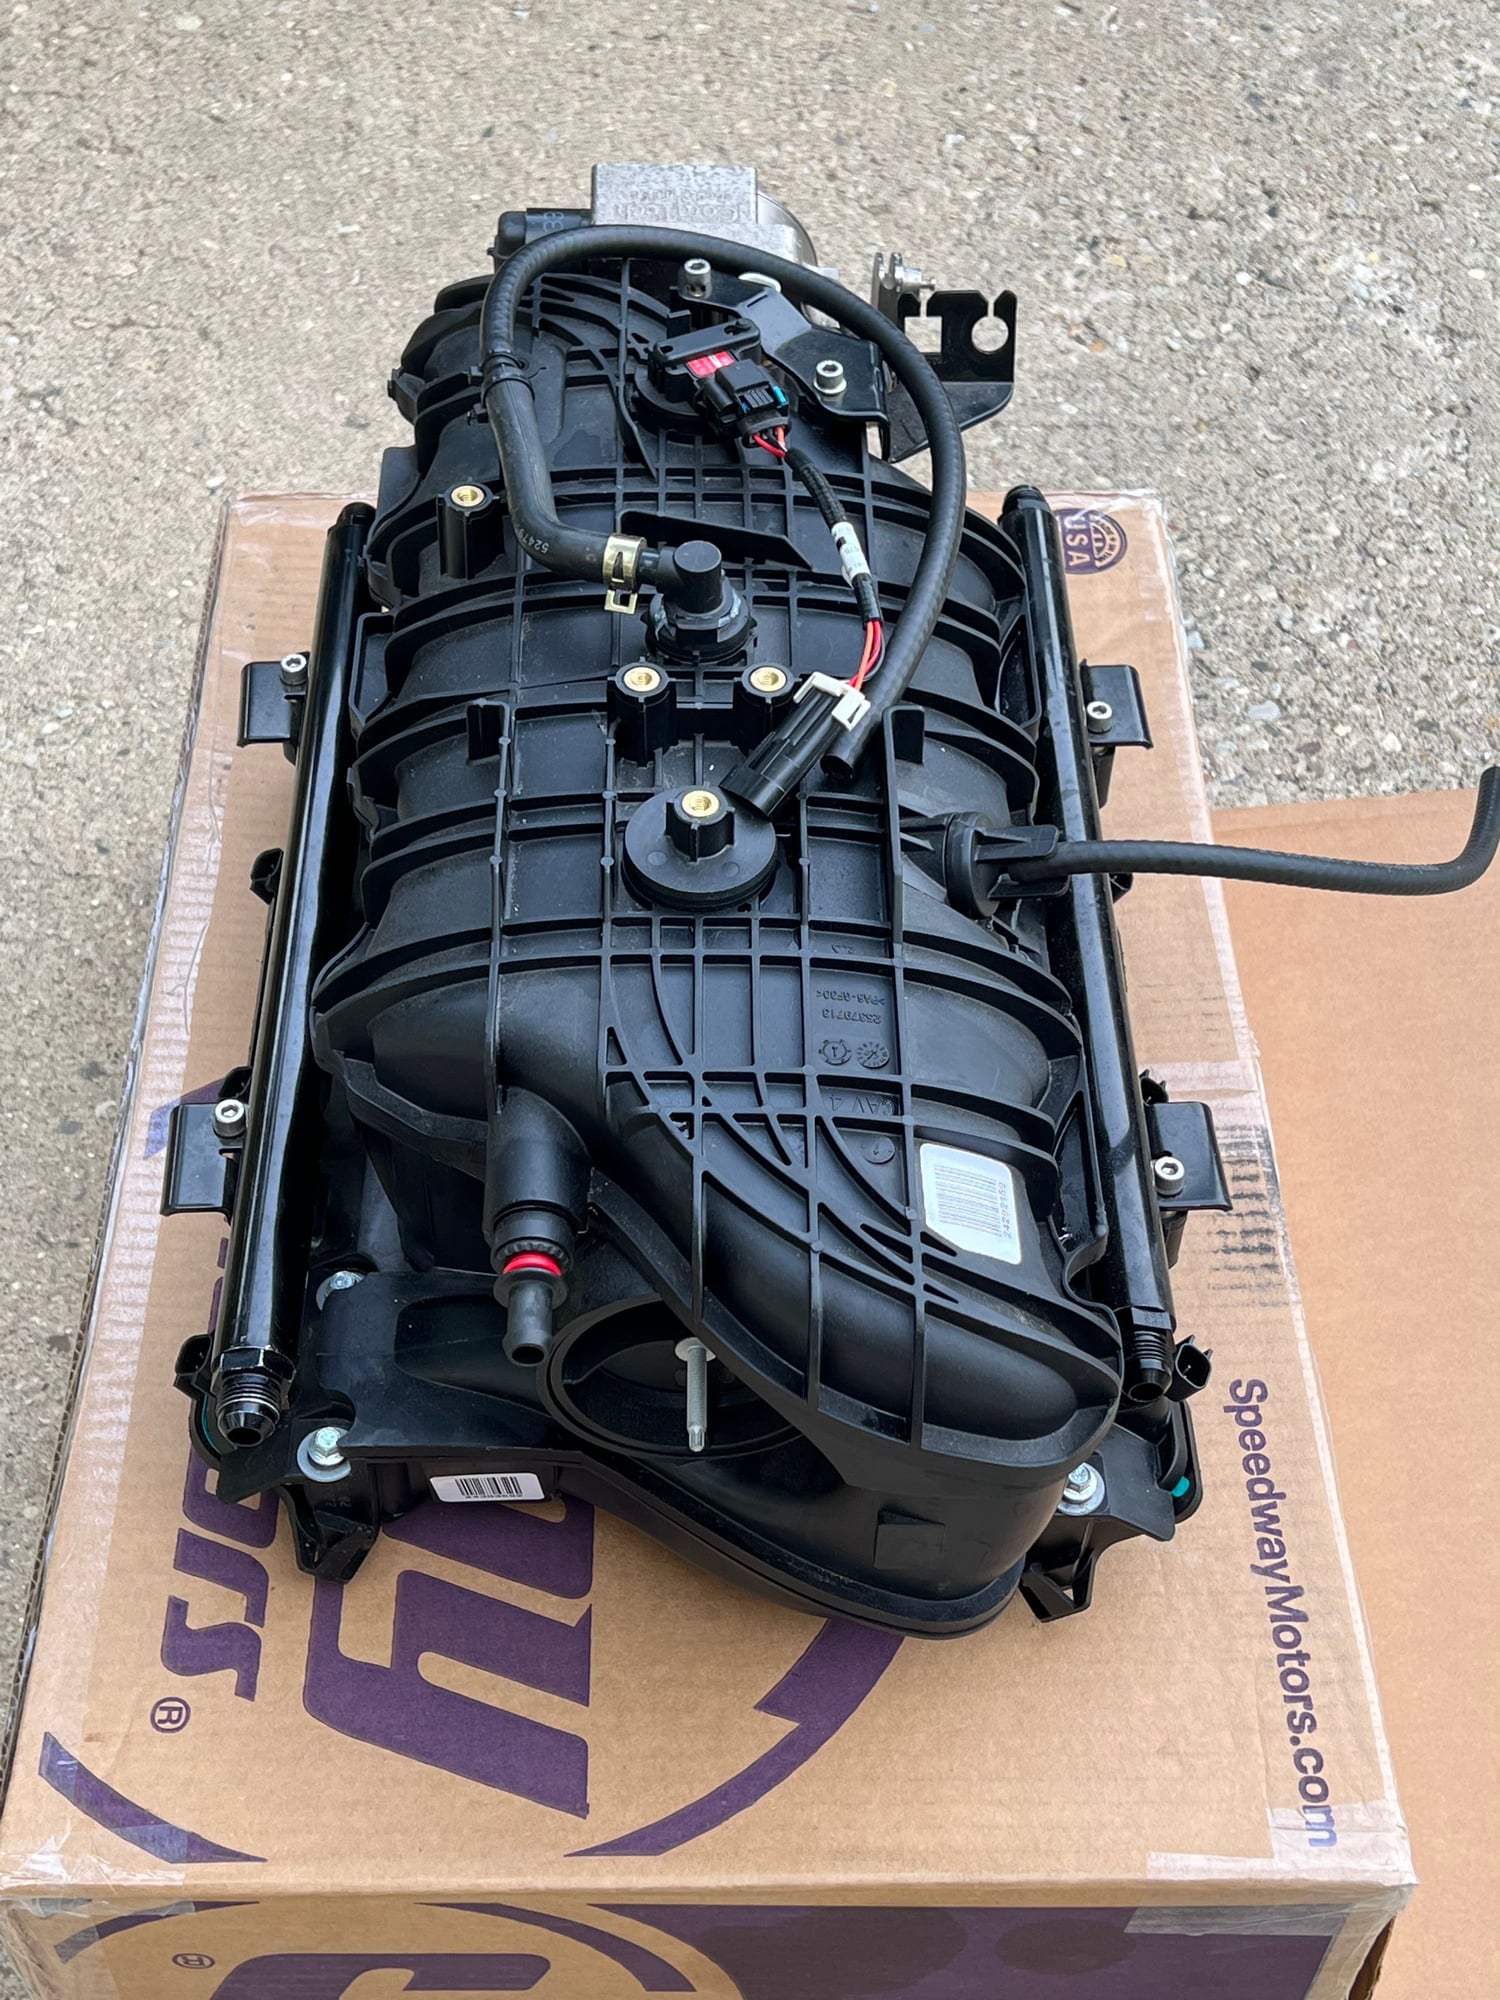 Engine - Intake/Fuel - Square port truck intake - Used - All Years  All Models - Streator, IL 61364, United States